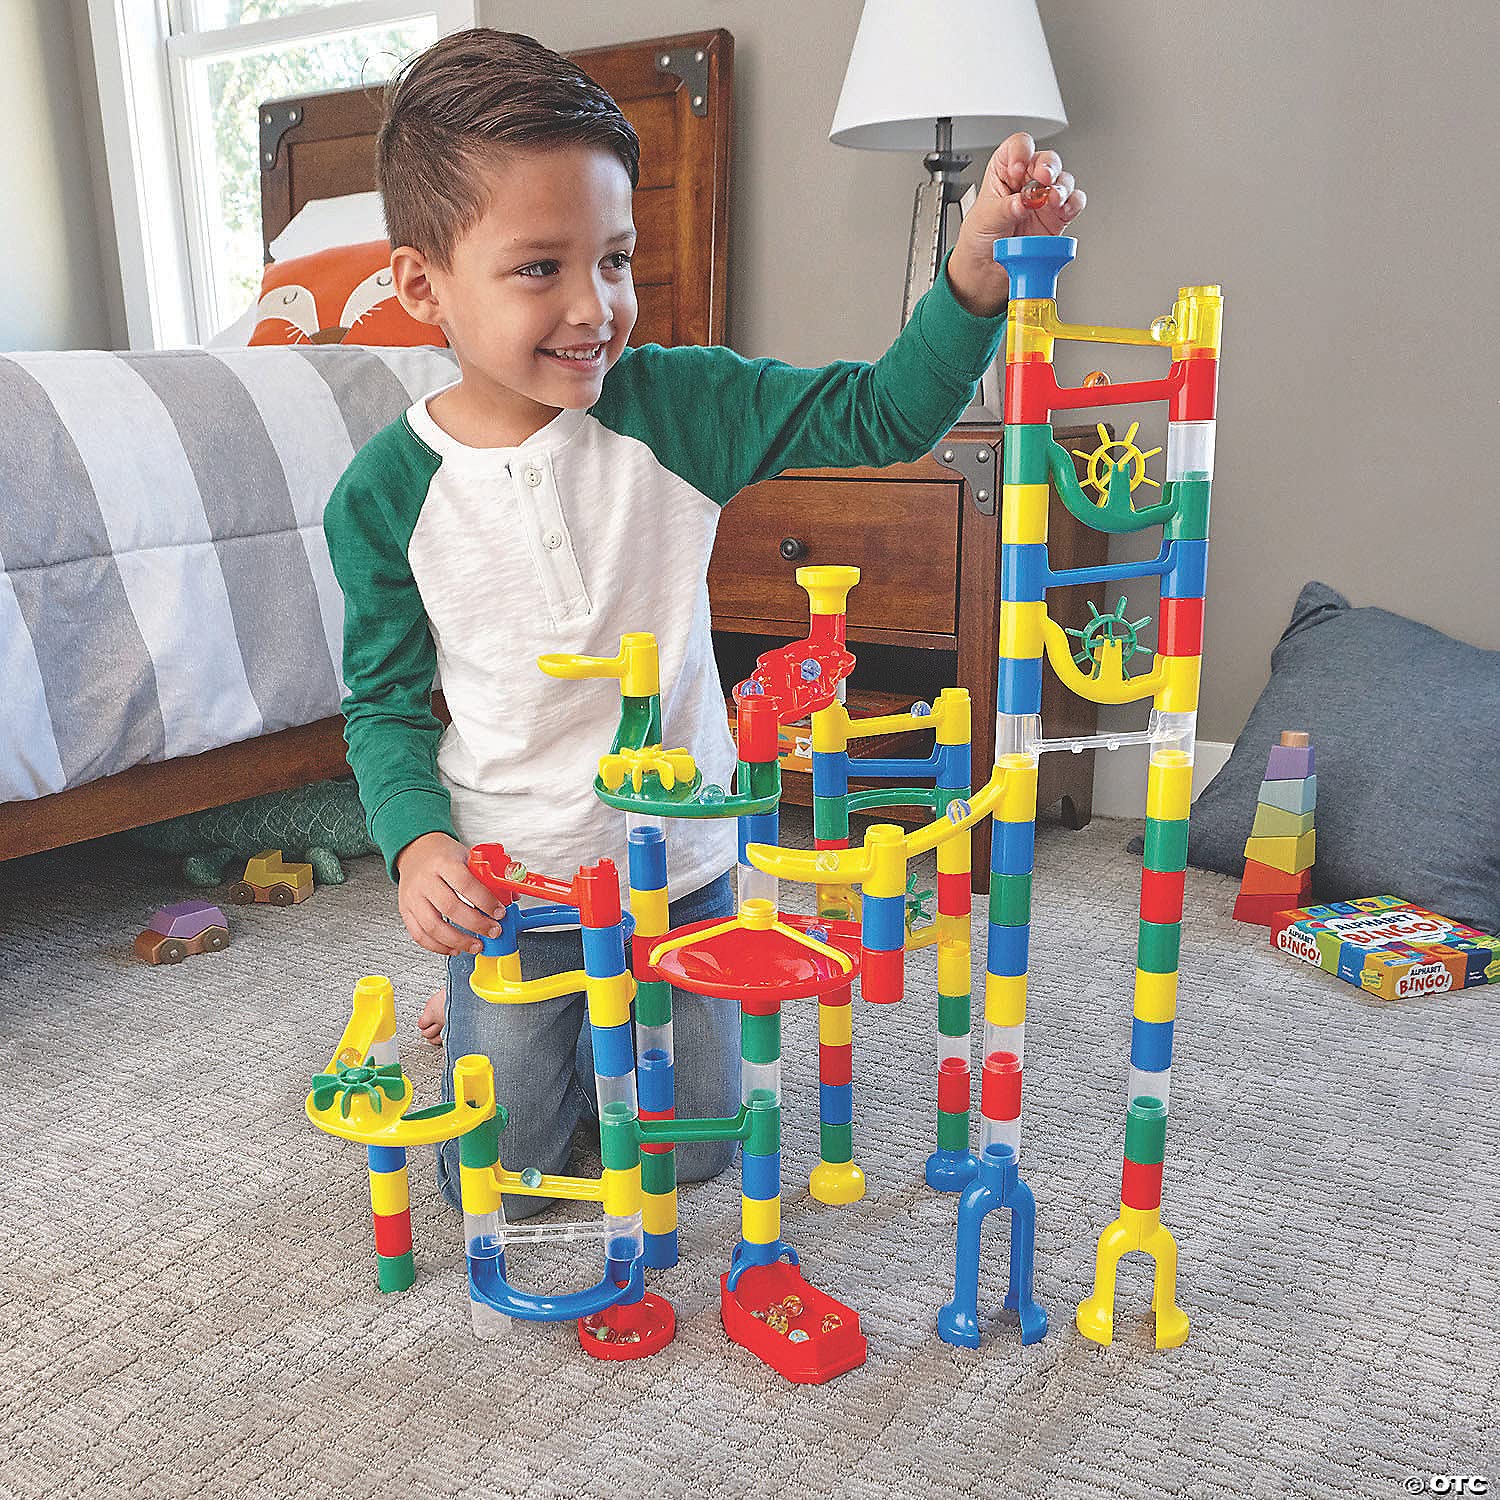 Marble Run: 123 Piece Set (103 Durable Pieces and 20 Marbles) Exclusively at MINDWARE!